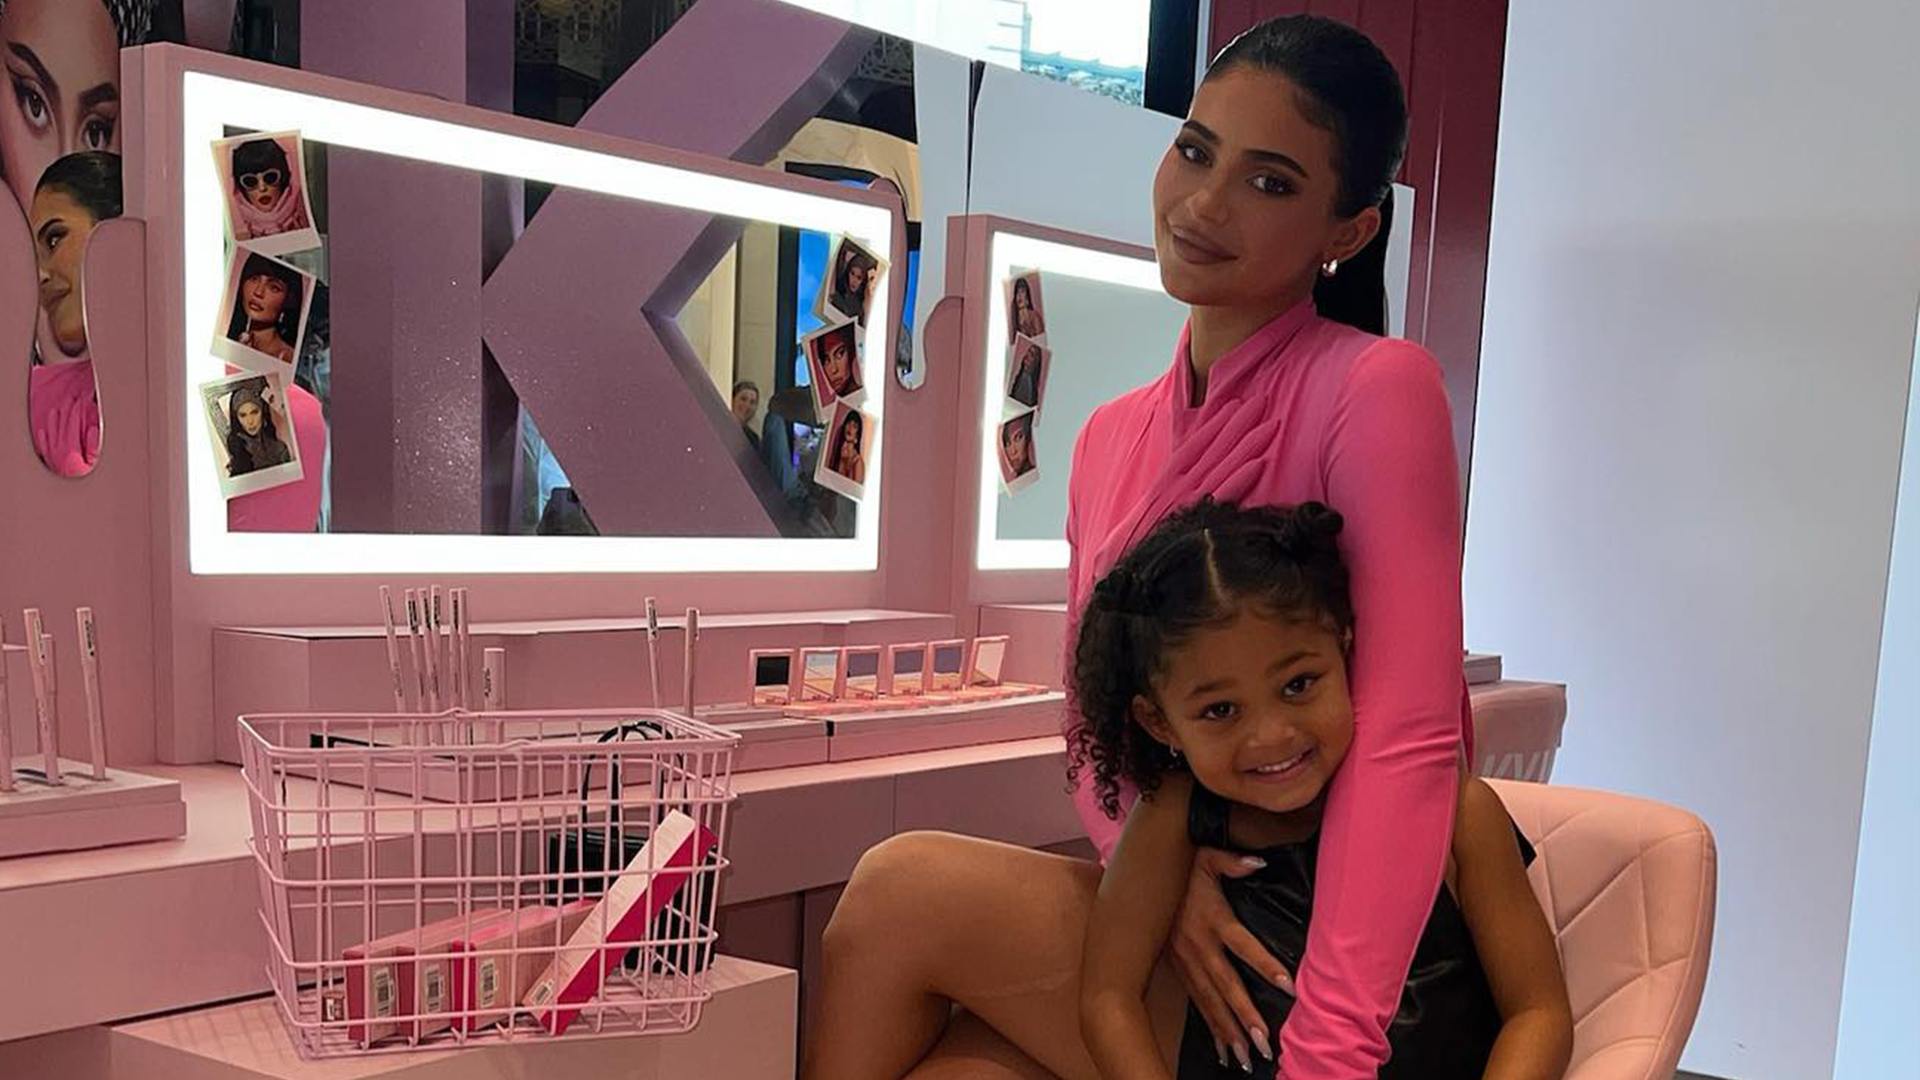 Kylie Jenner shows Stormi, her spoiled daughter, shopping in London with more than $16K worth of Dior bags and designer shoes